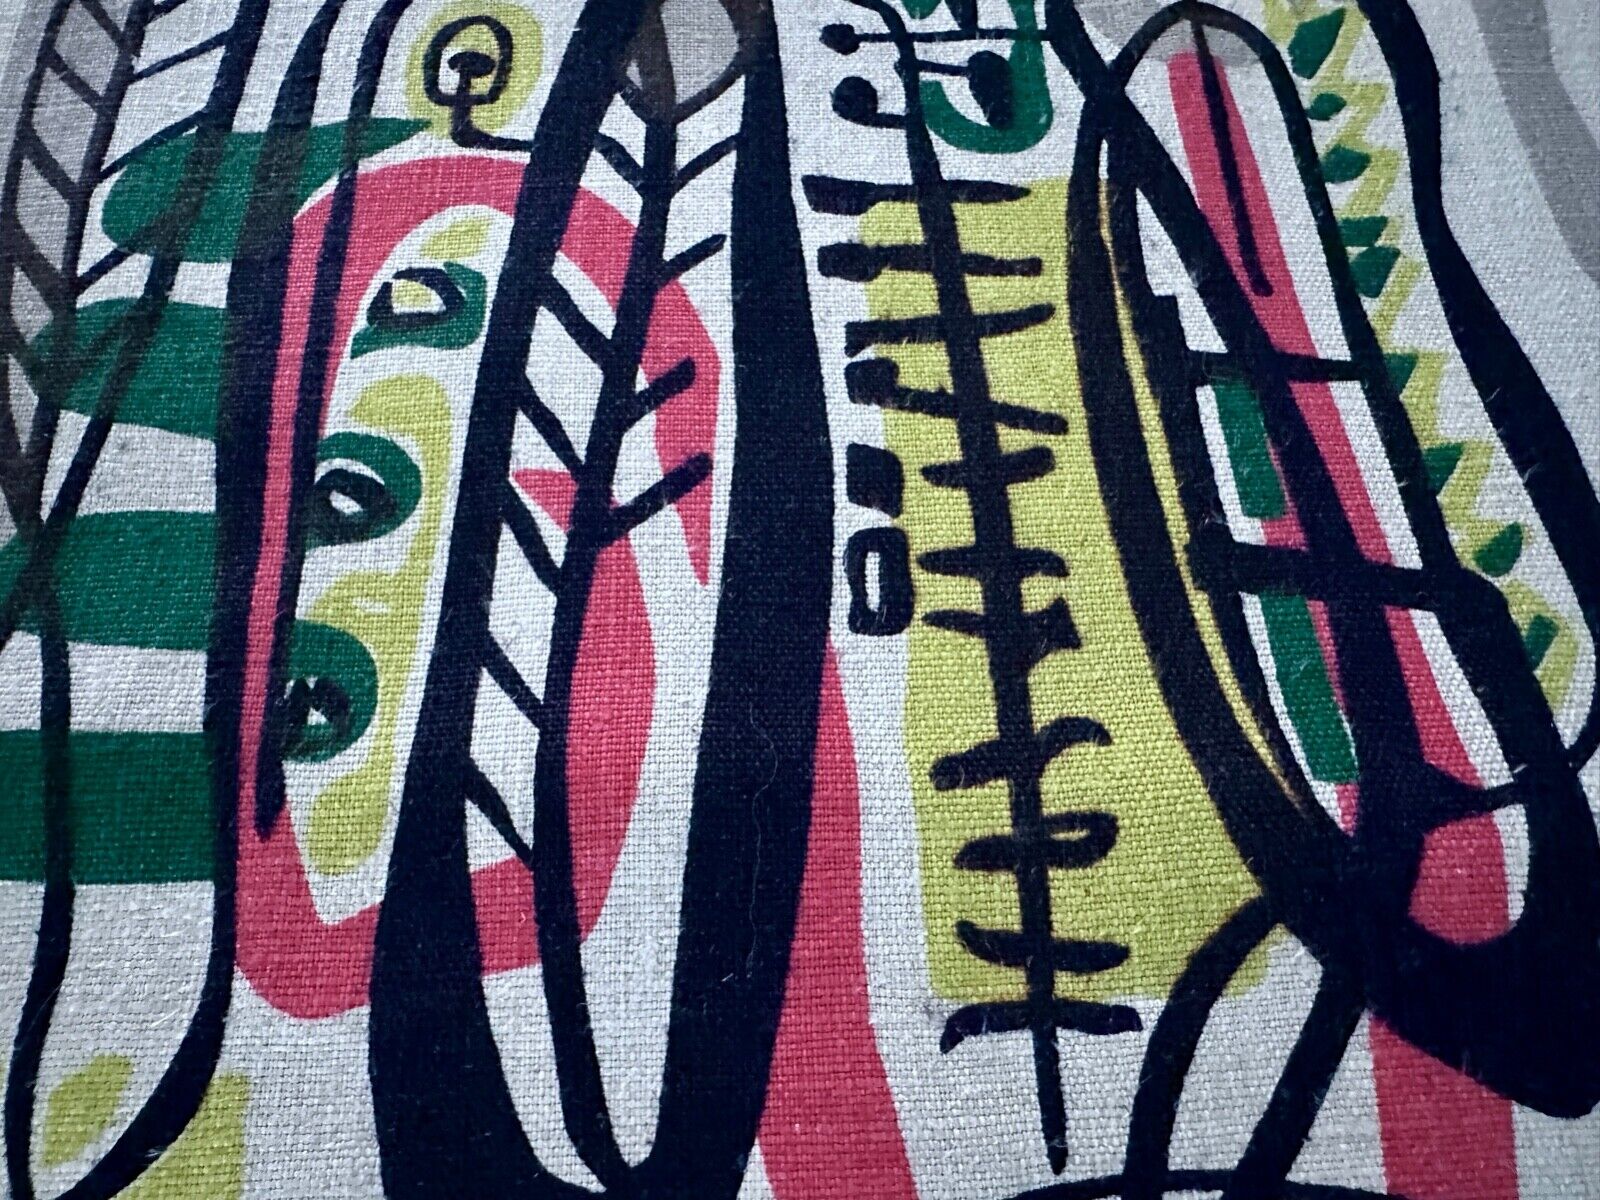 Ruth Reeves Hand Print Picasso Inspired ABSTRACT FLEURA Barkcloth Vintage Fabric